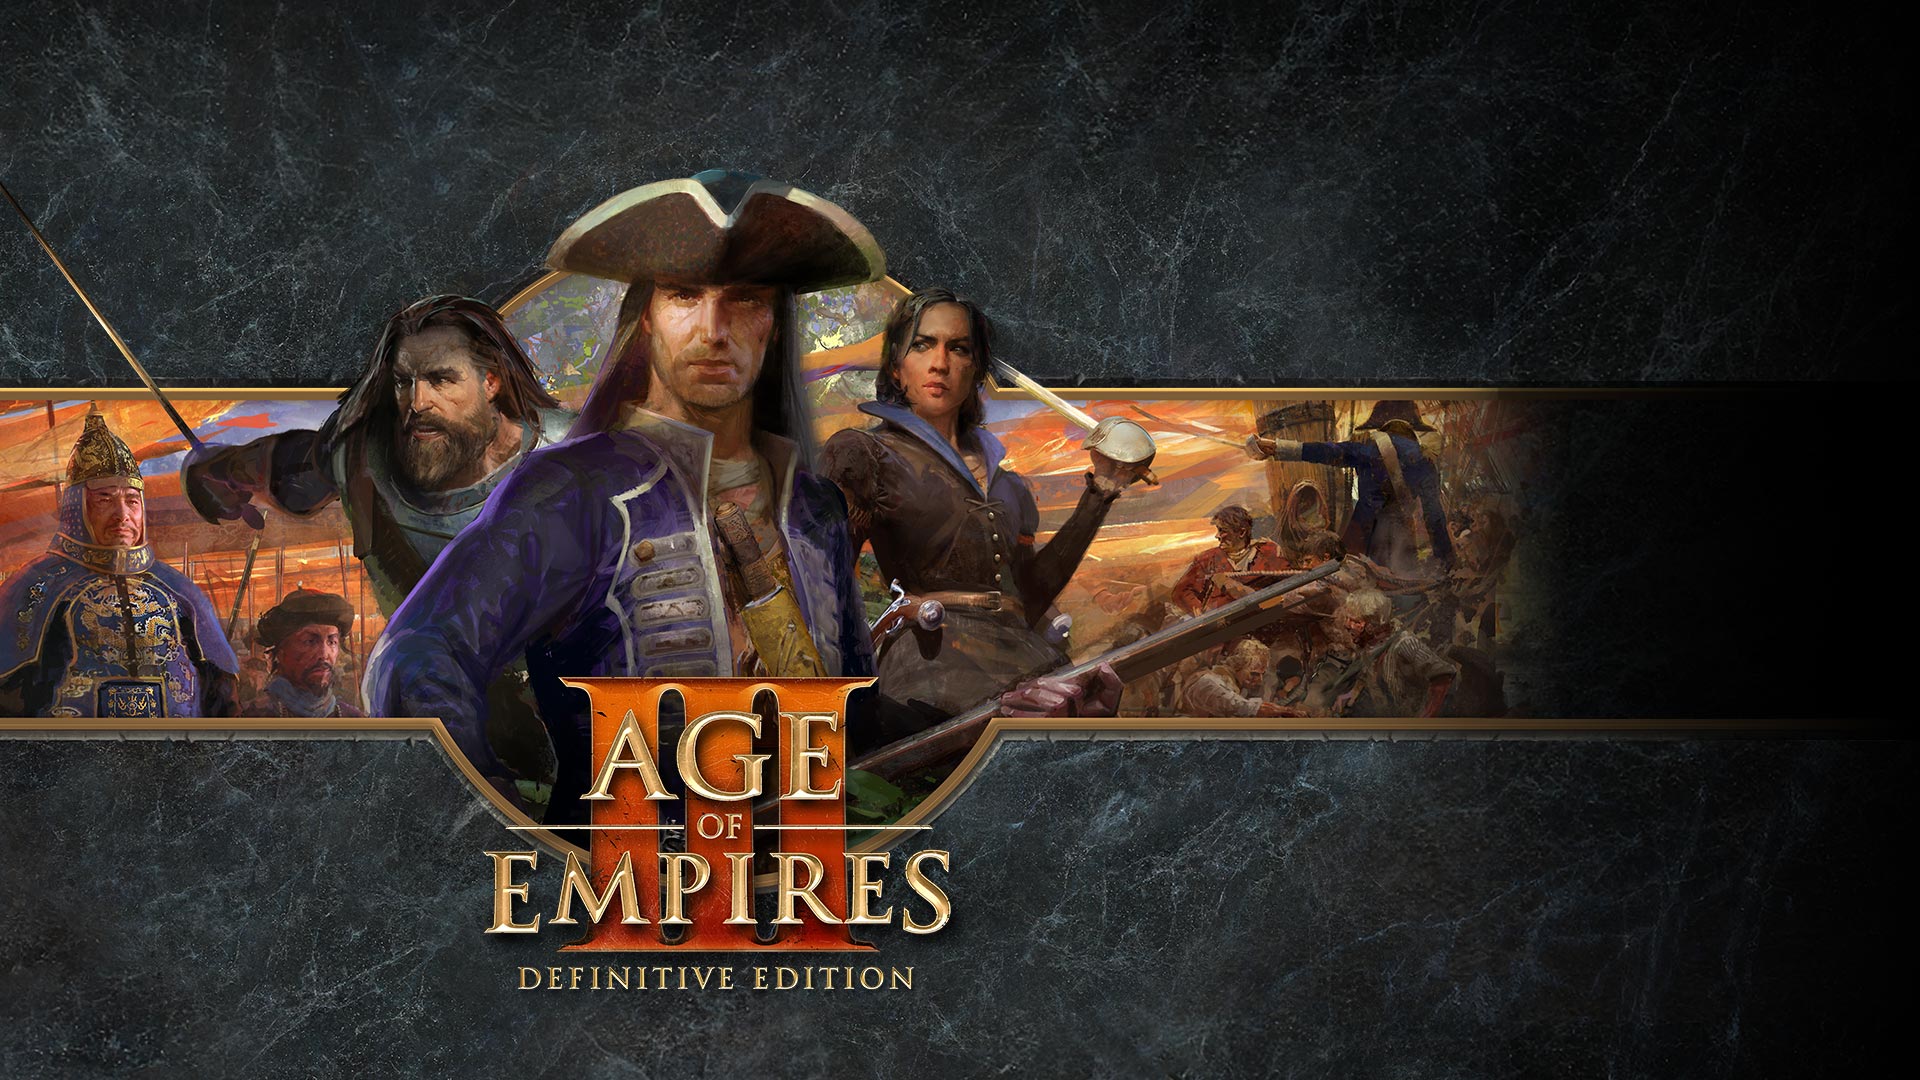 Age of Empires III: Definitive Edition，擺出姿勢的角色